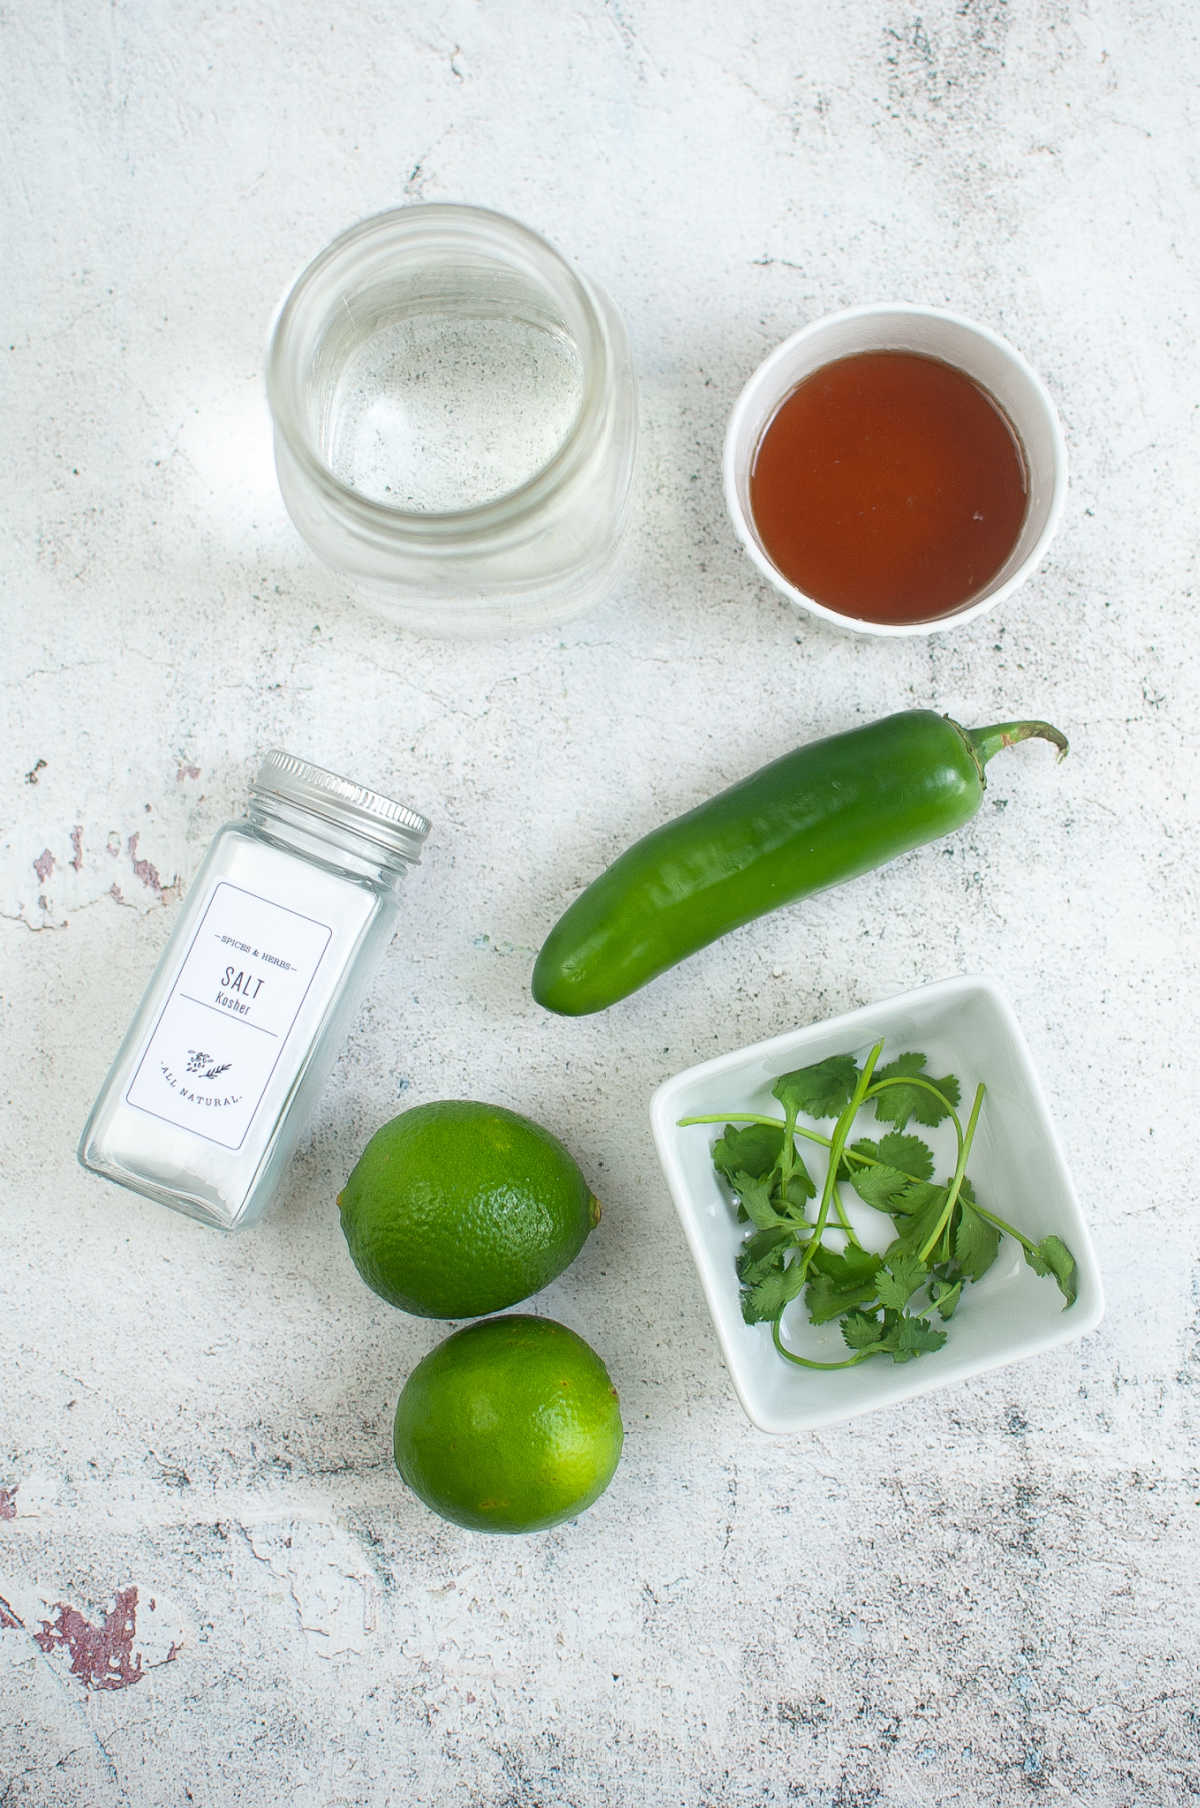 Ingredients laid out for a Jalapeno Margarita